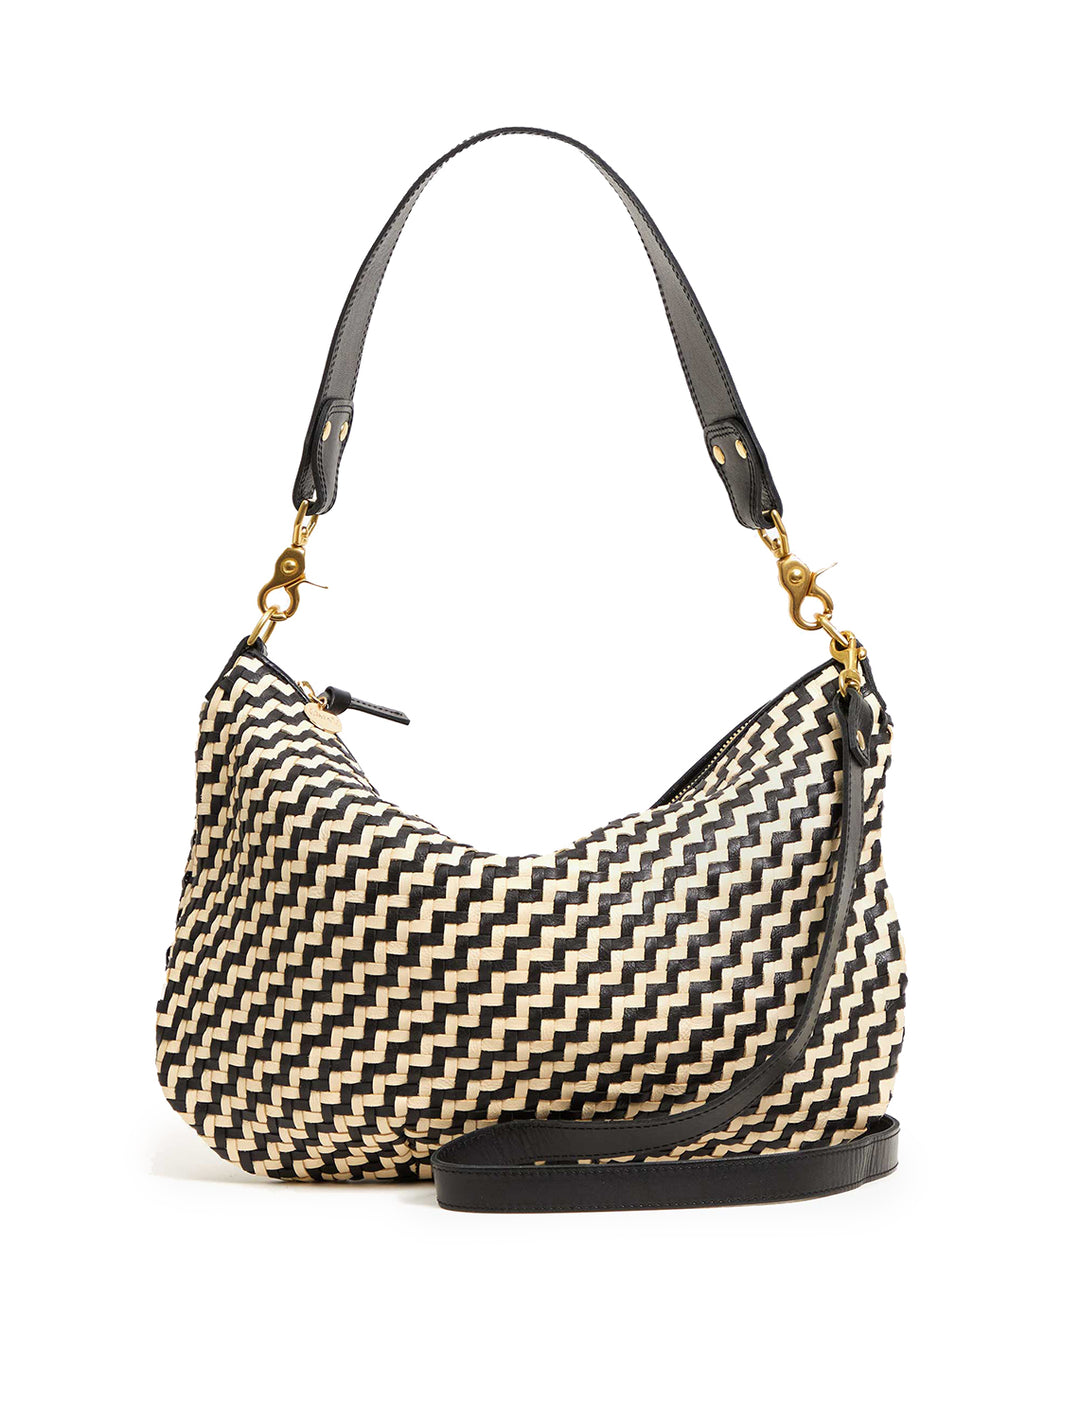 Front view of Clare V.'s moyen messenger in black and cream zig zag woven.